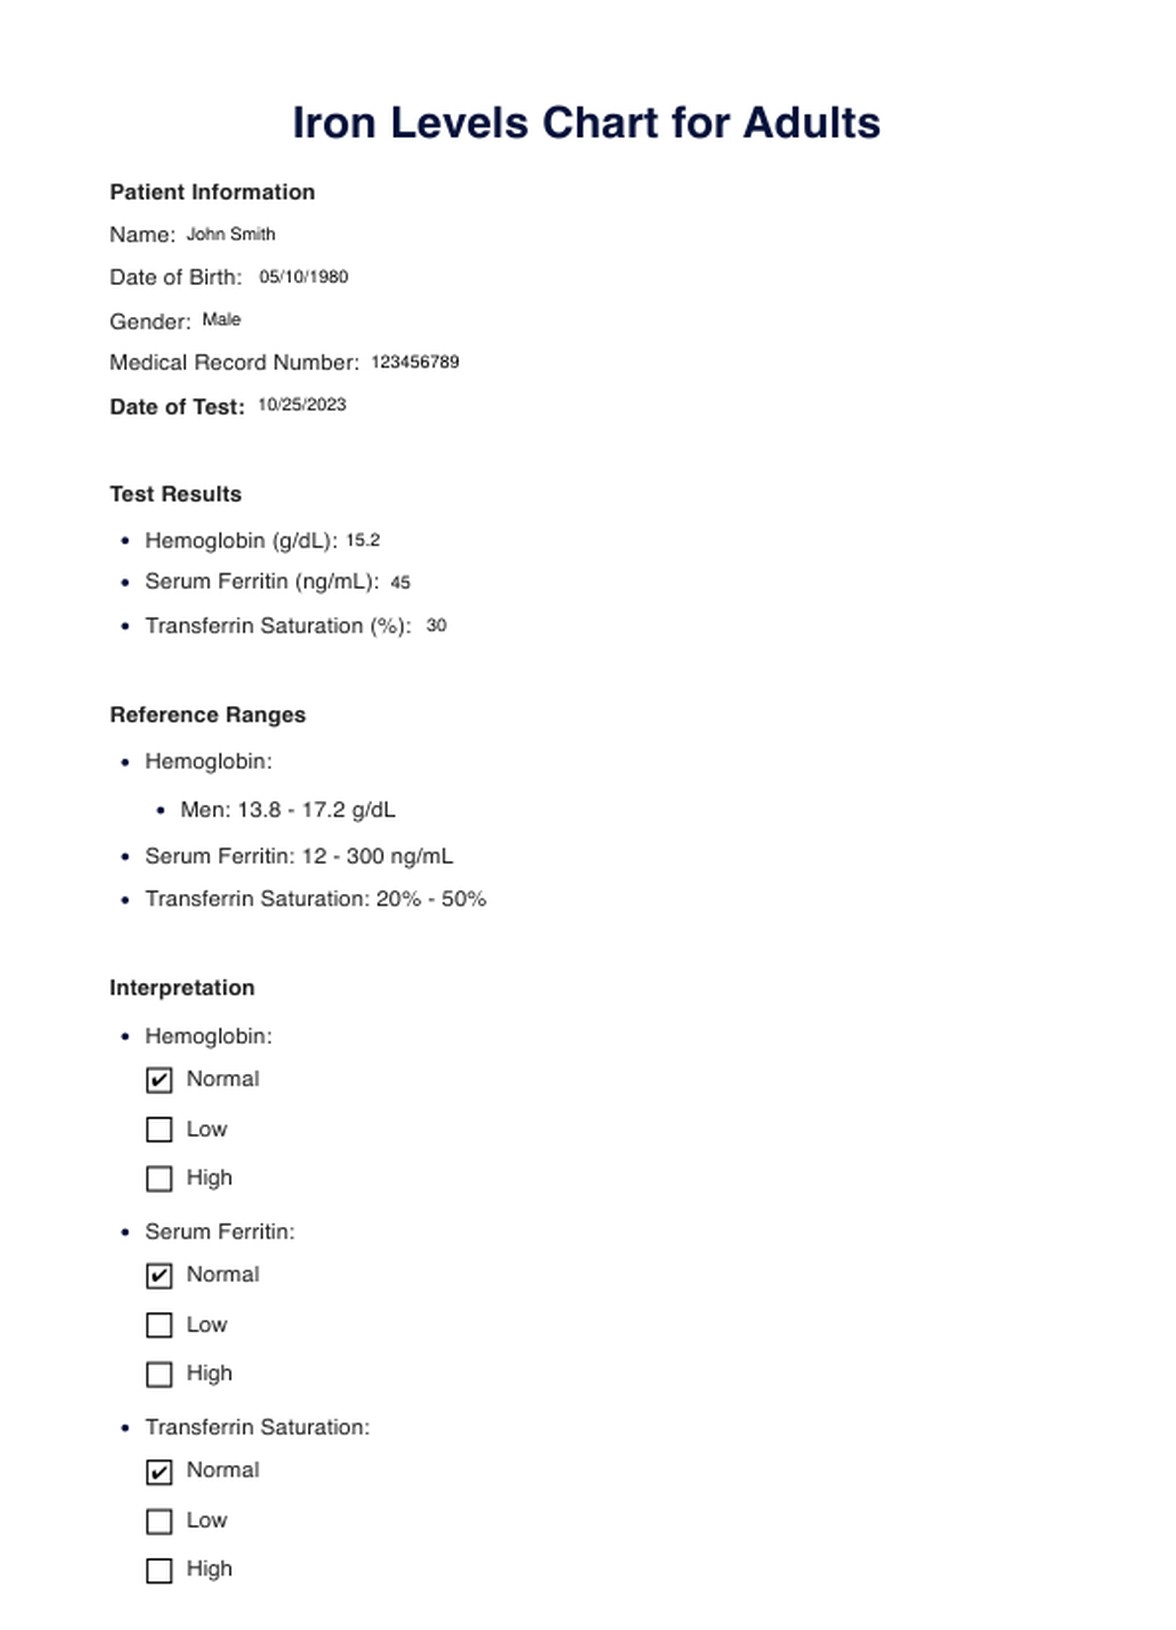 Iron Levels Chart For Adults PDF Example